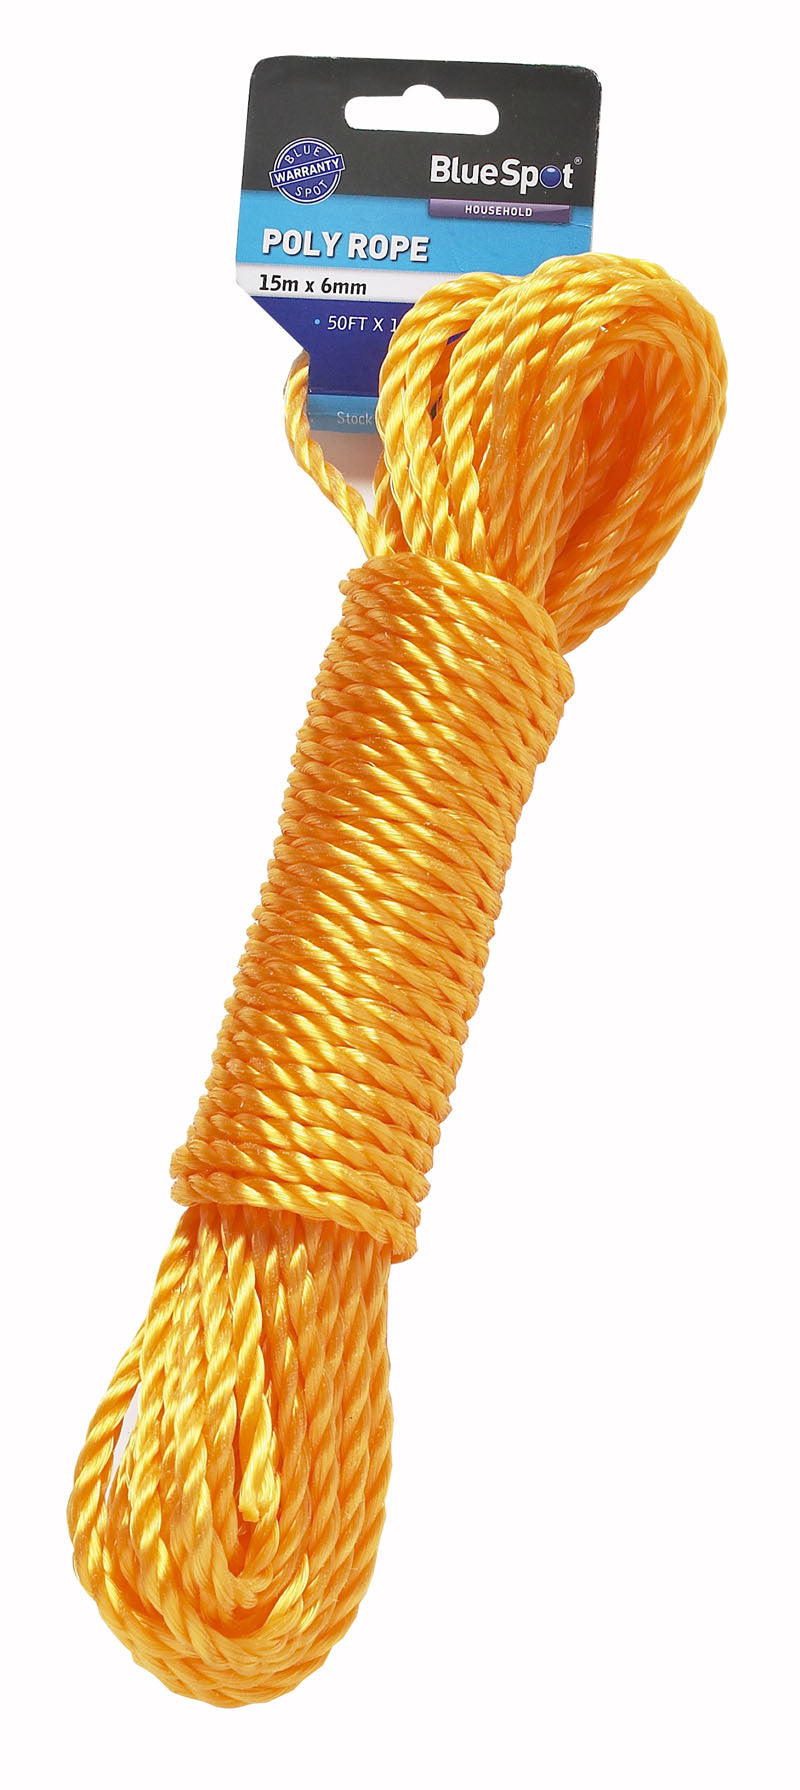 15m x 6mm (50ft) Poly Rope